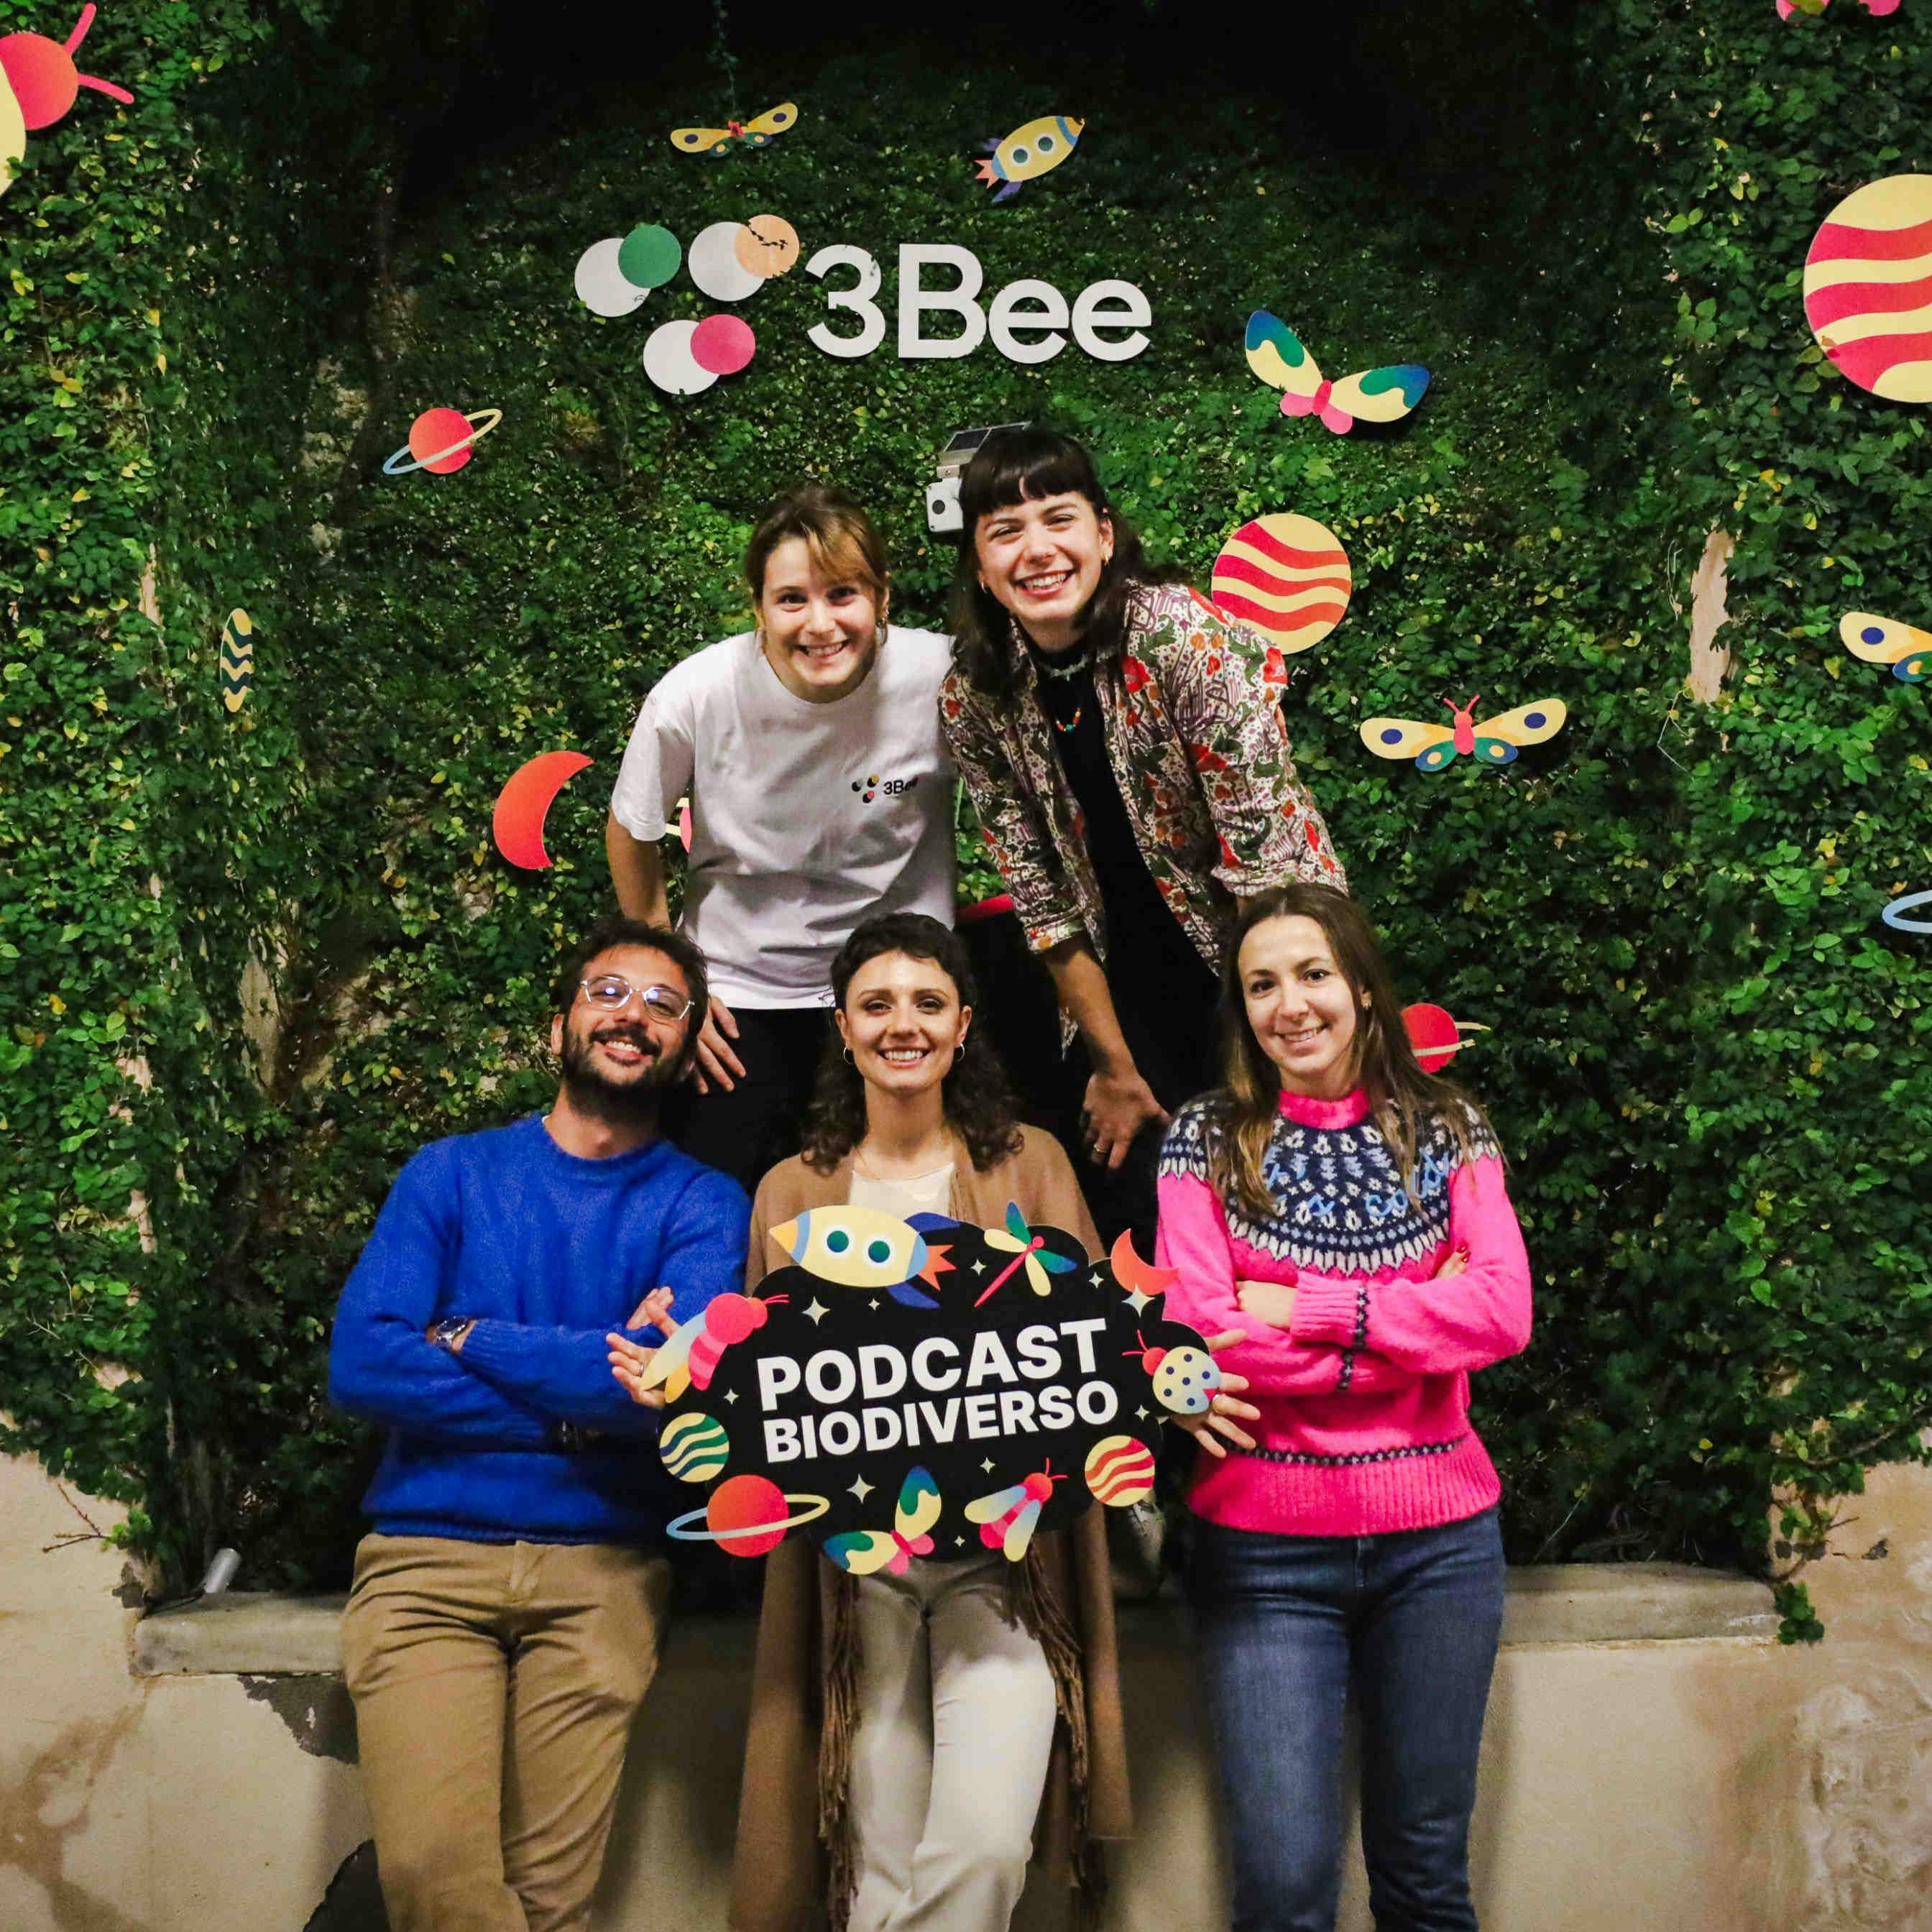 3Bee launches its first podcast show: 'Podcast Biodiverse'